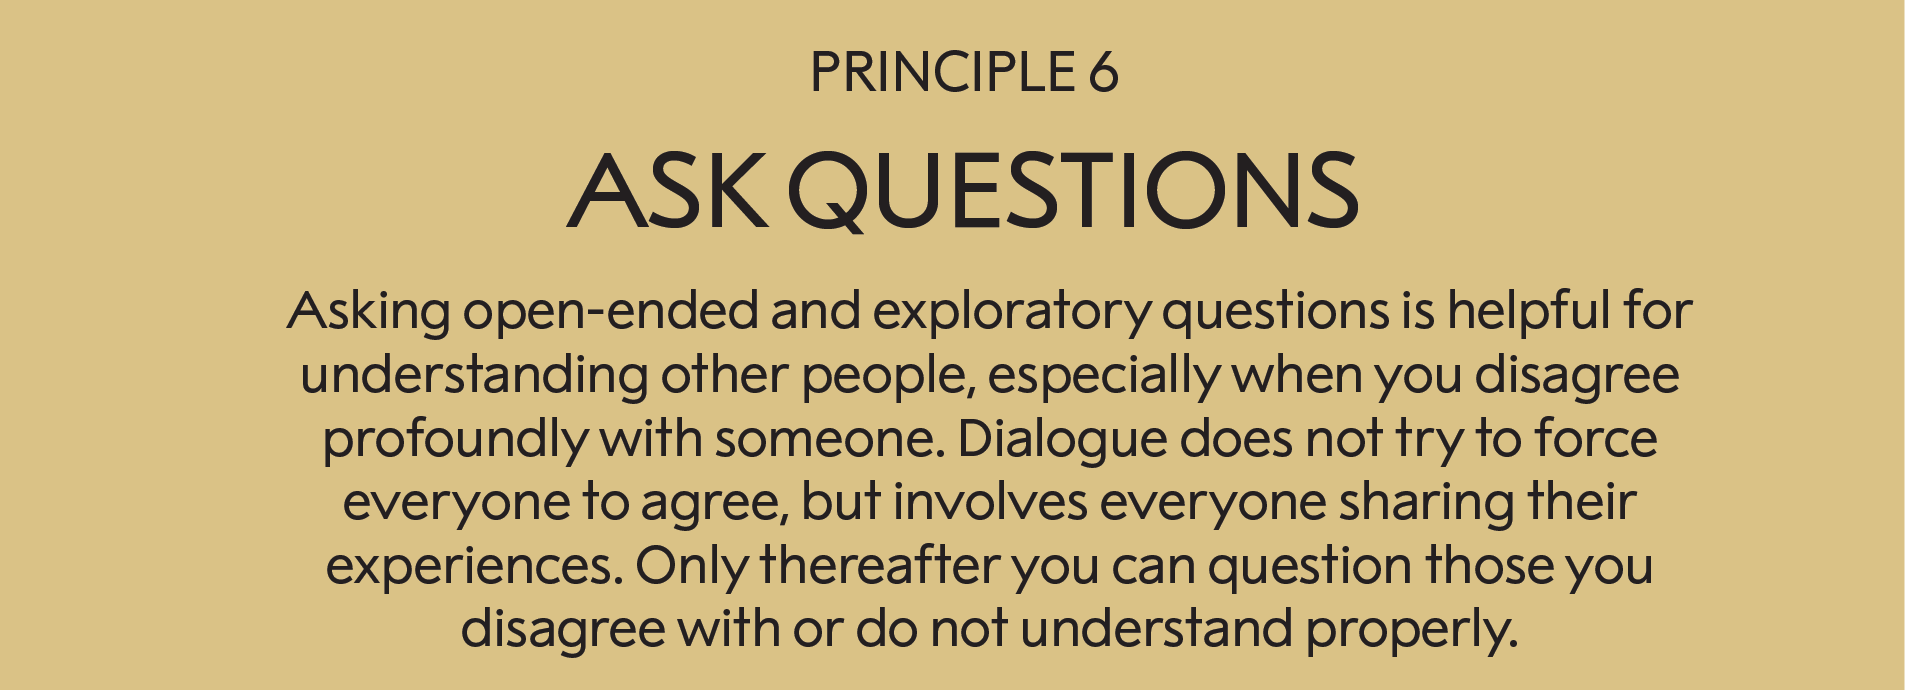 Principle 6: Ask questions  : Asking open-ended and exploratory questions is helpful for understanding other people, especially when you disagree profoundly with someone. Dialogue does not try to force everyone to agree, but does involve everyone sharing their experiences. This allows you to question those you disagree with or do not understand properly. Well-formulated questions can be crucial.    